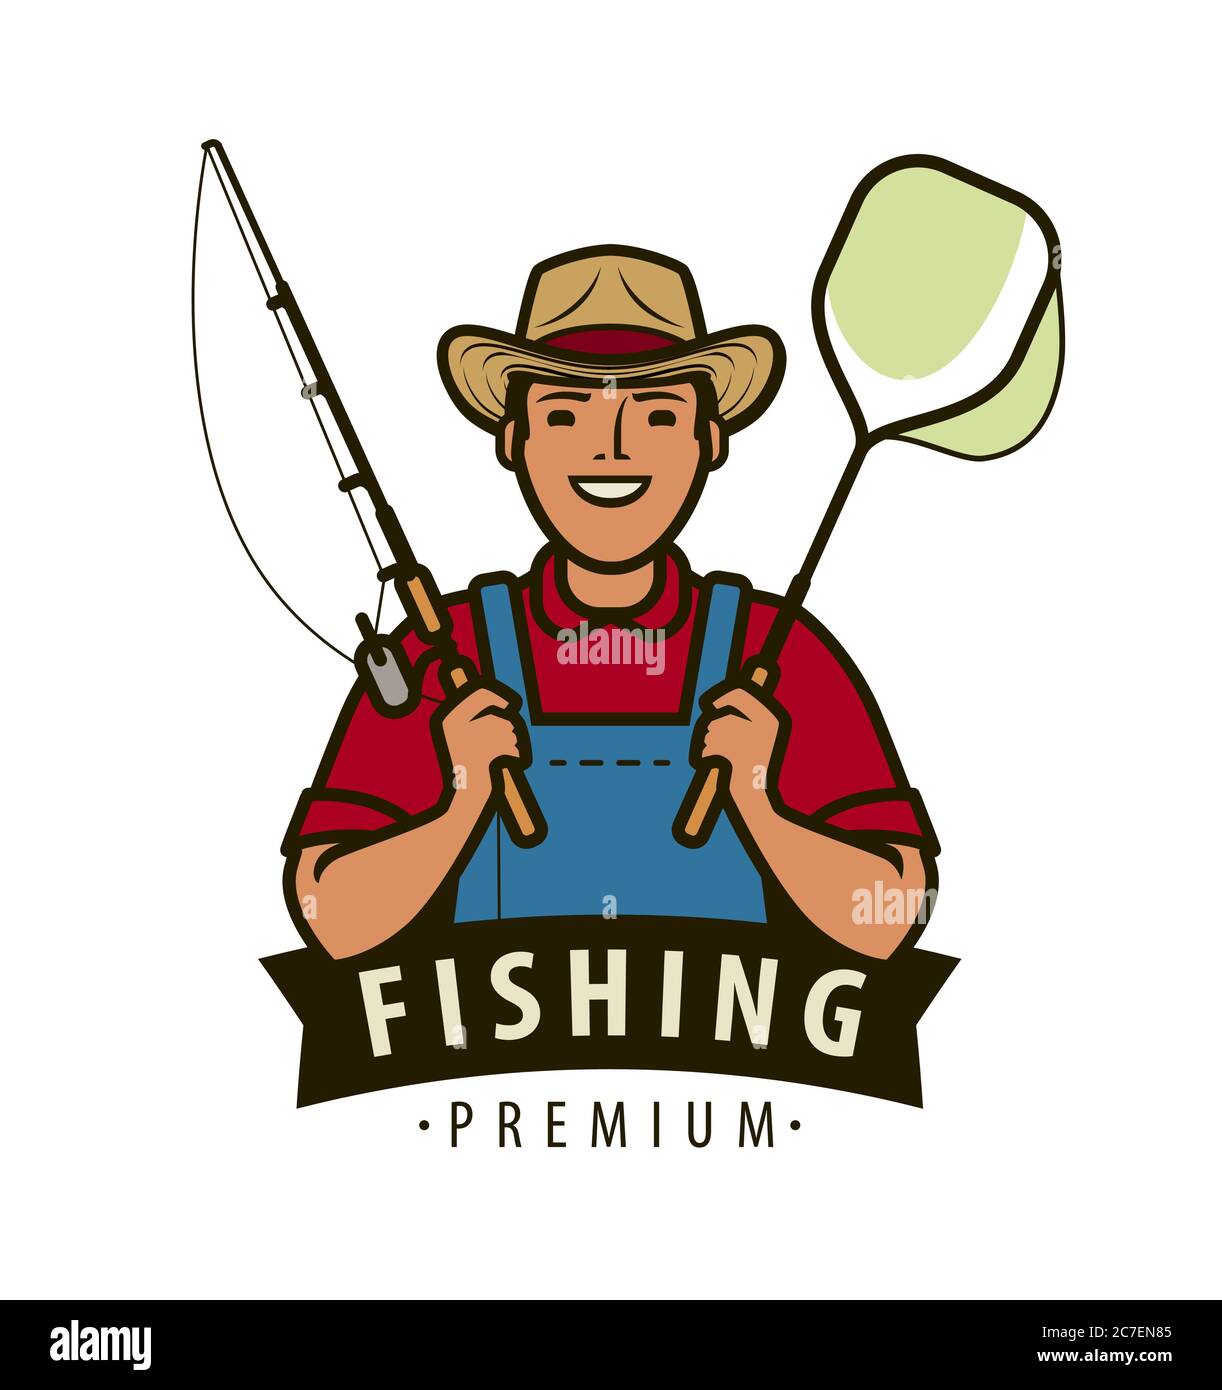 Fisherman with fishing rod logo. Fishery, fish concept Stock Vector